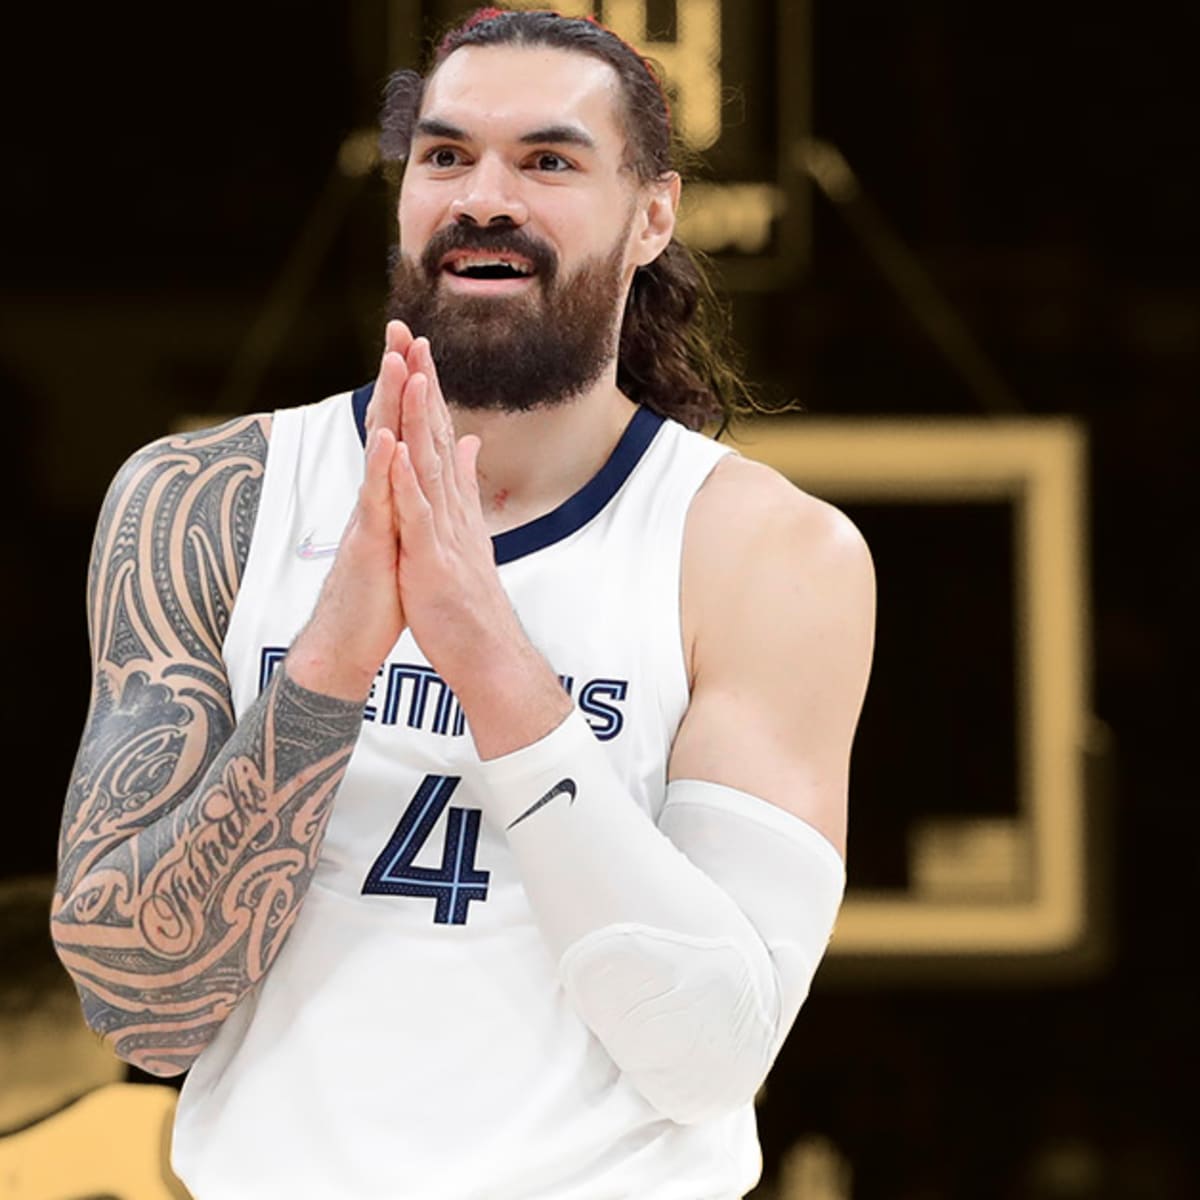 Steven Adams' review of his time at Pitt is  not great